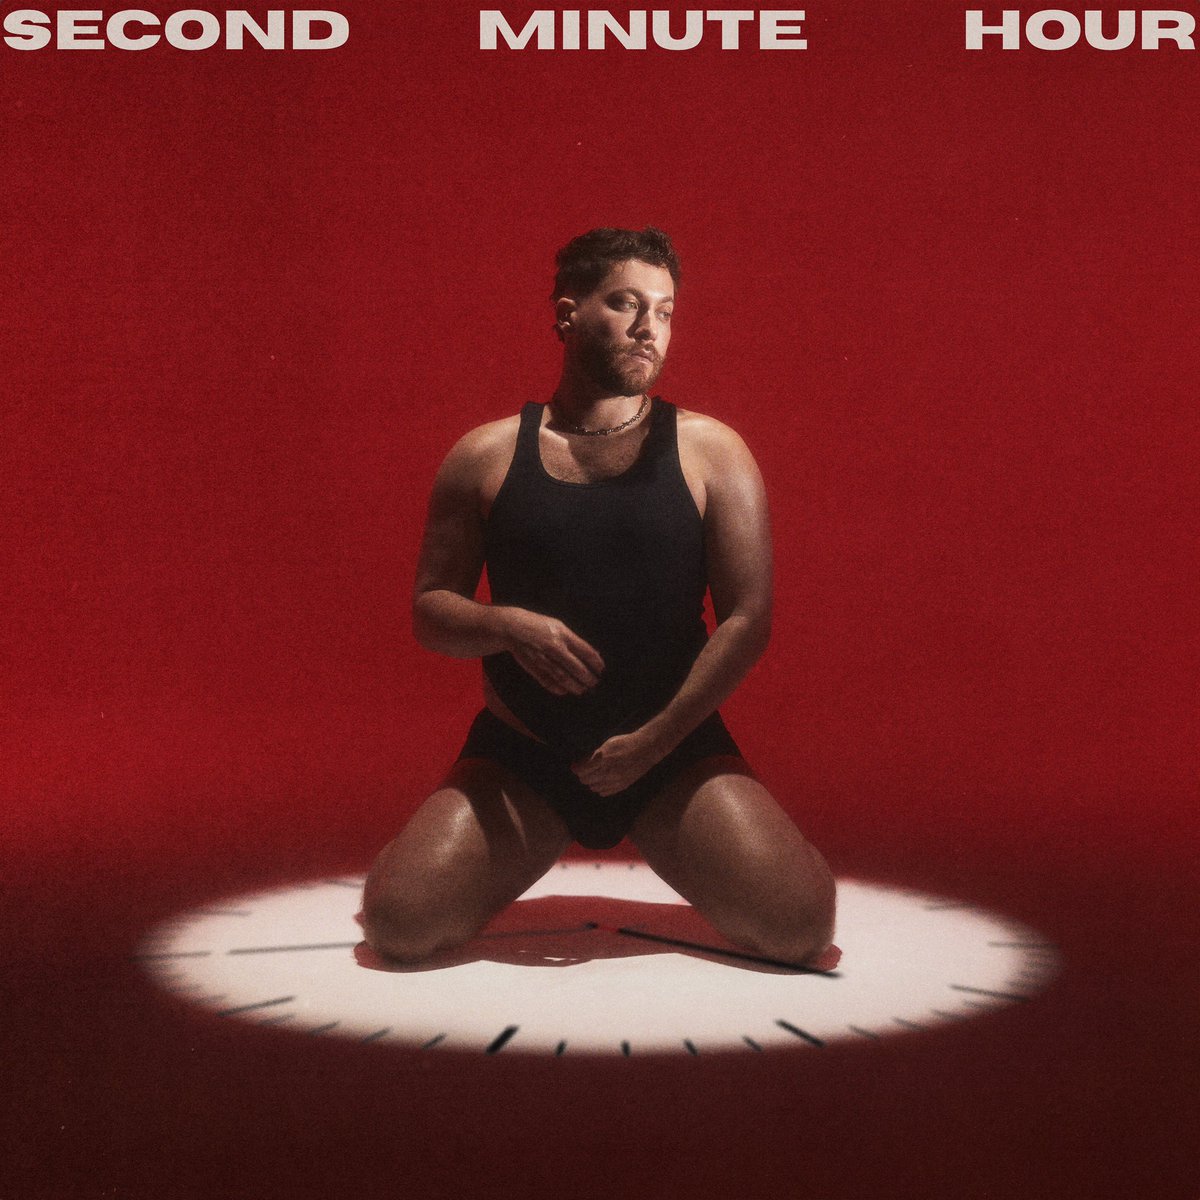 “SECOND MINUTE HOUR” out feb 16th 😈